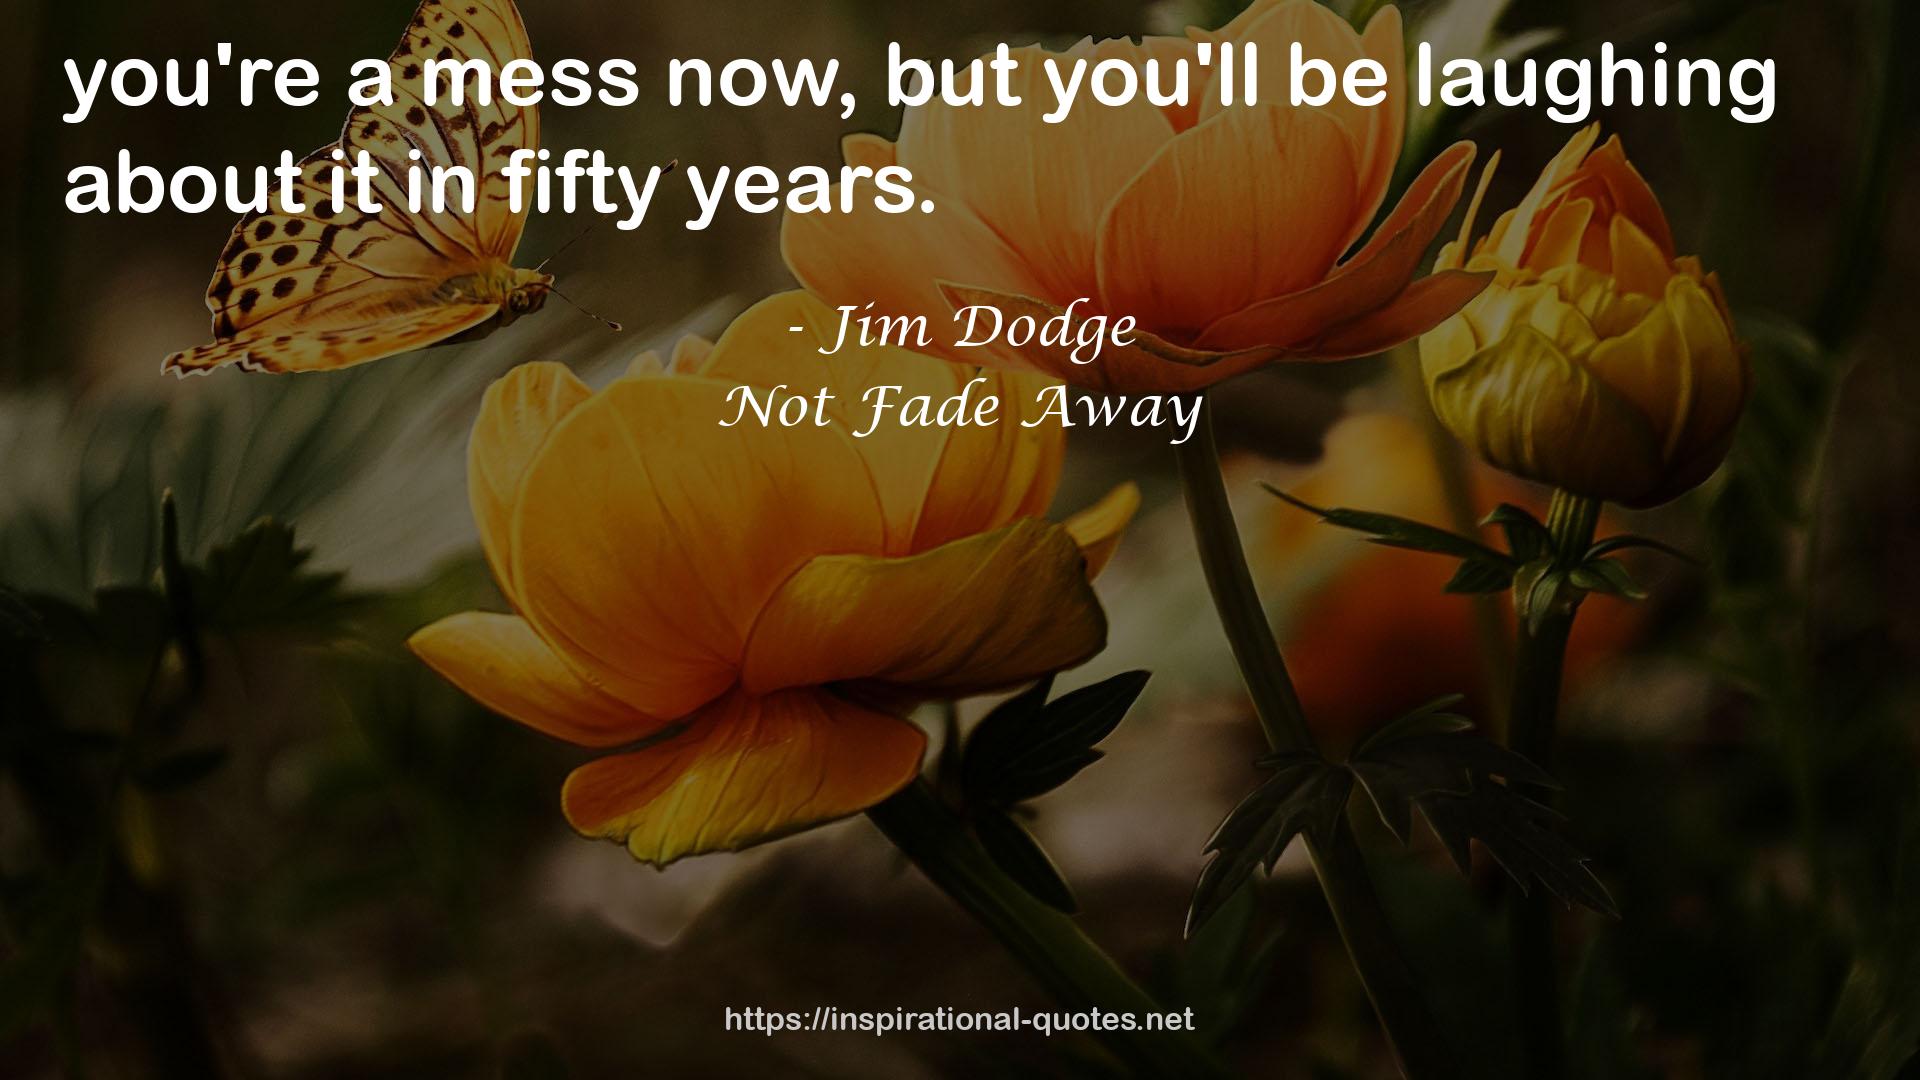 Not Fade Away QUOTES